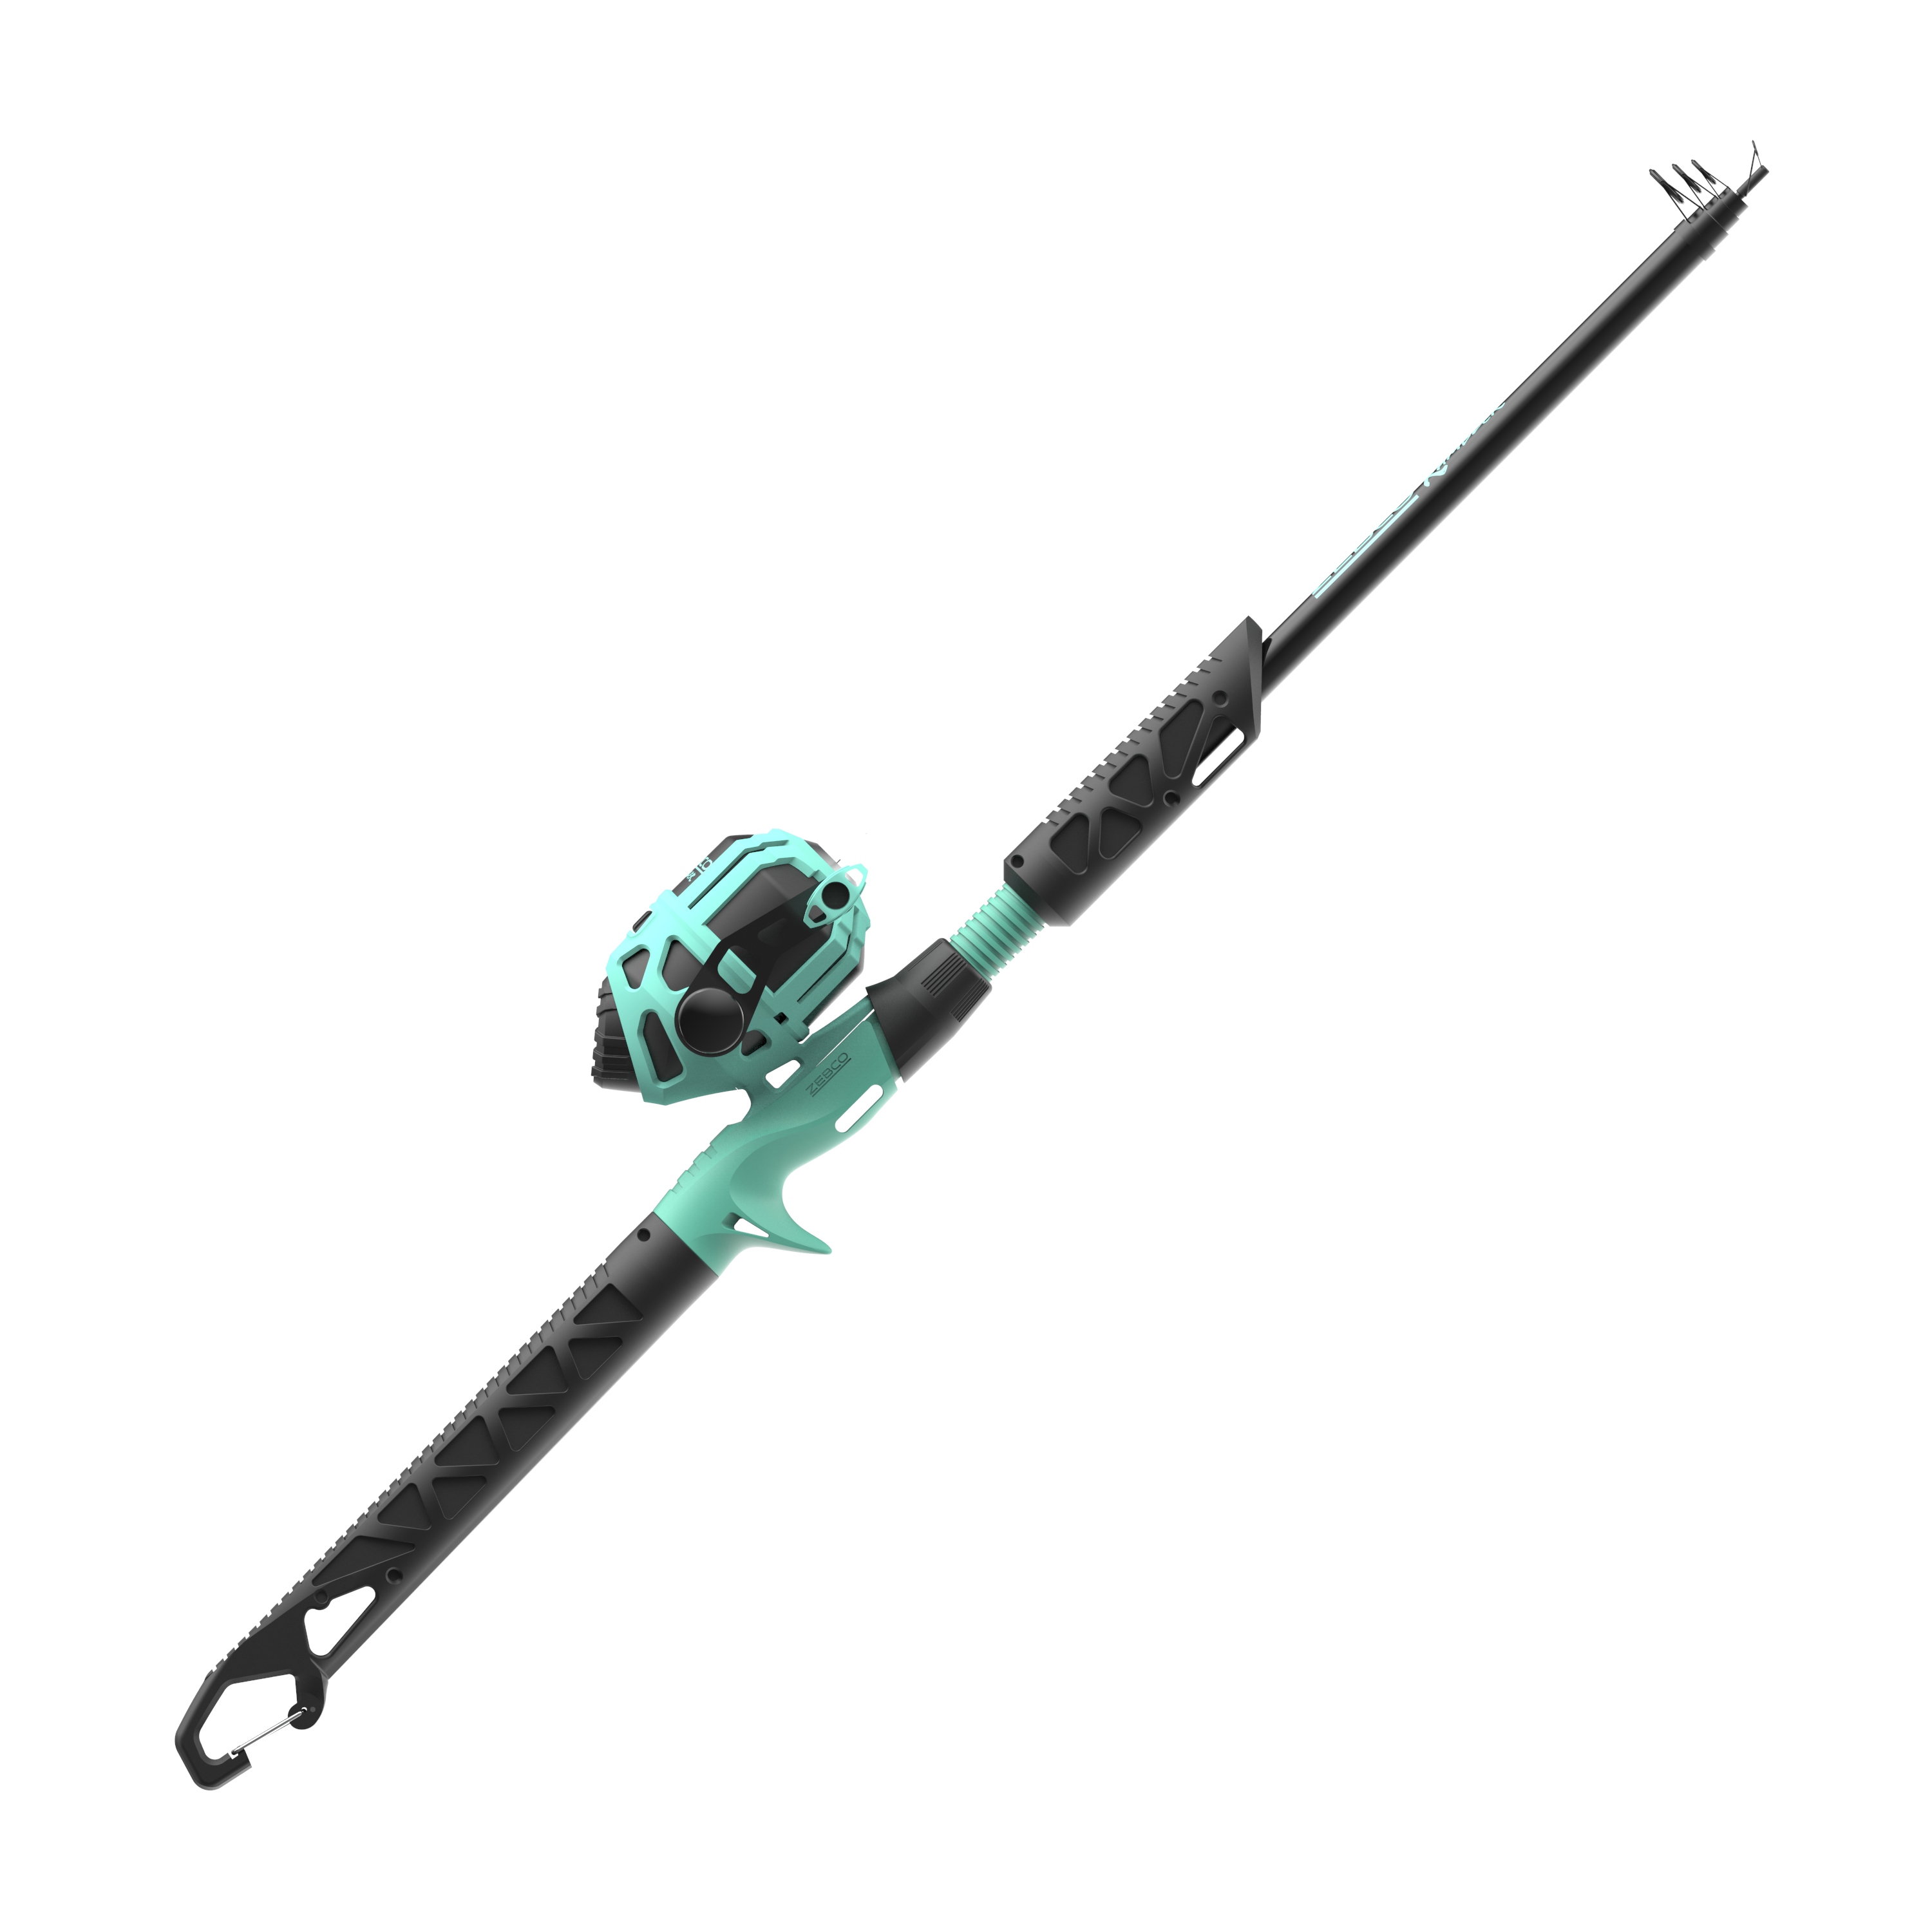 Zebco Zcast Telescopic Spinning Fishing Rod (1 unit)